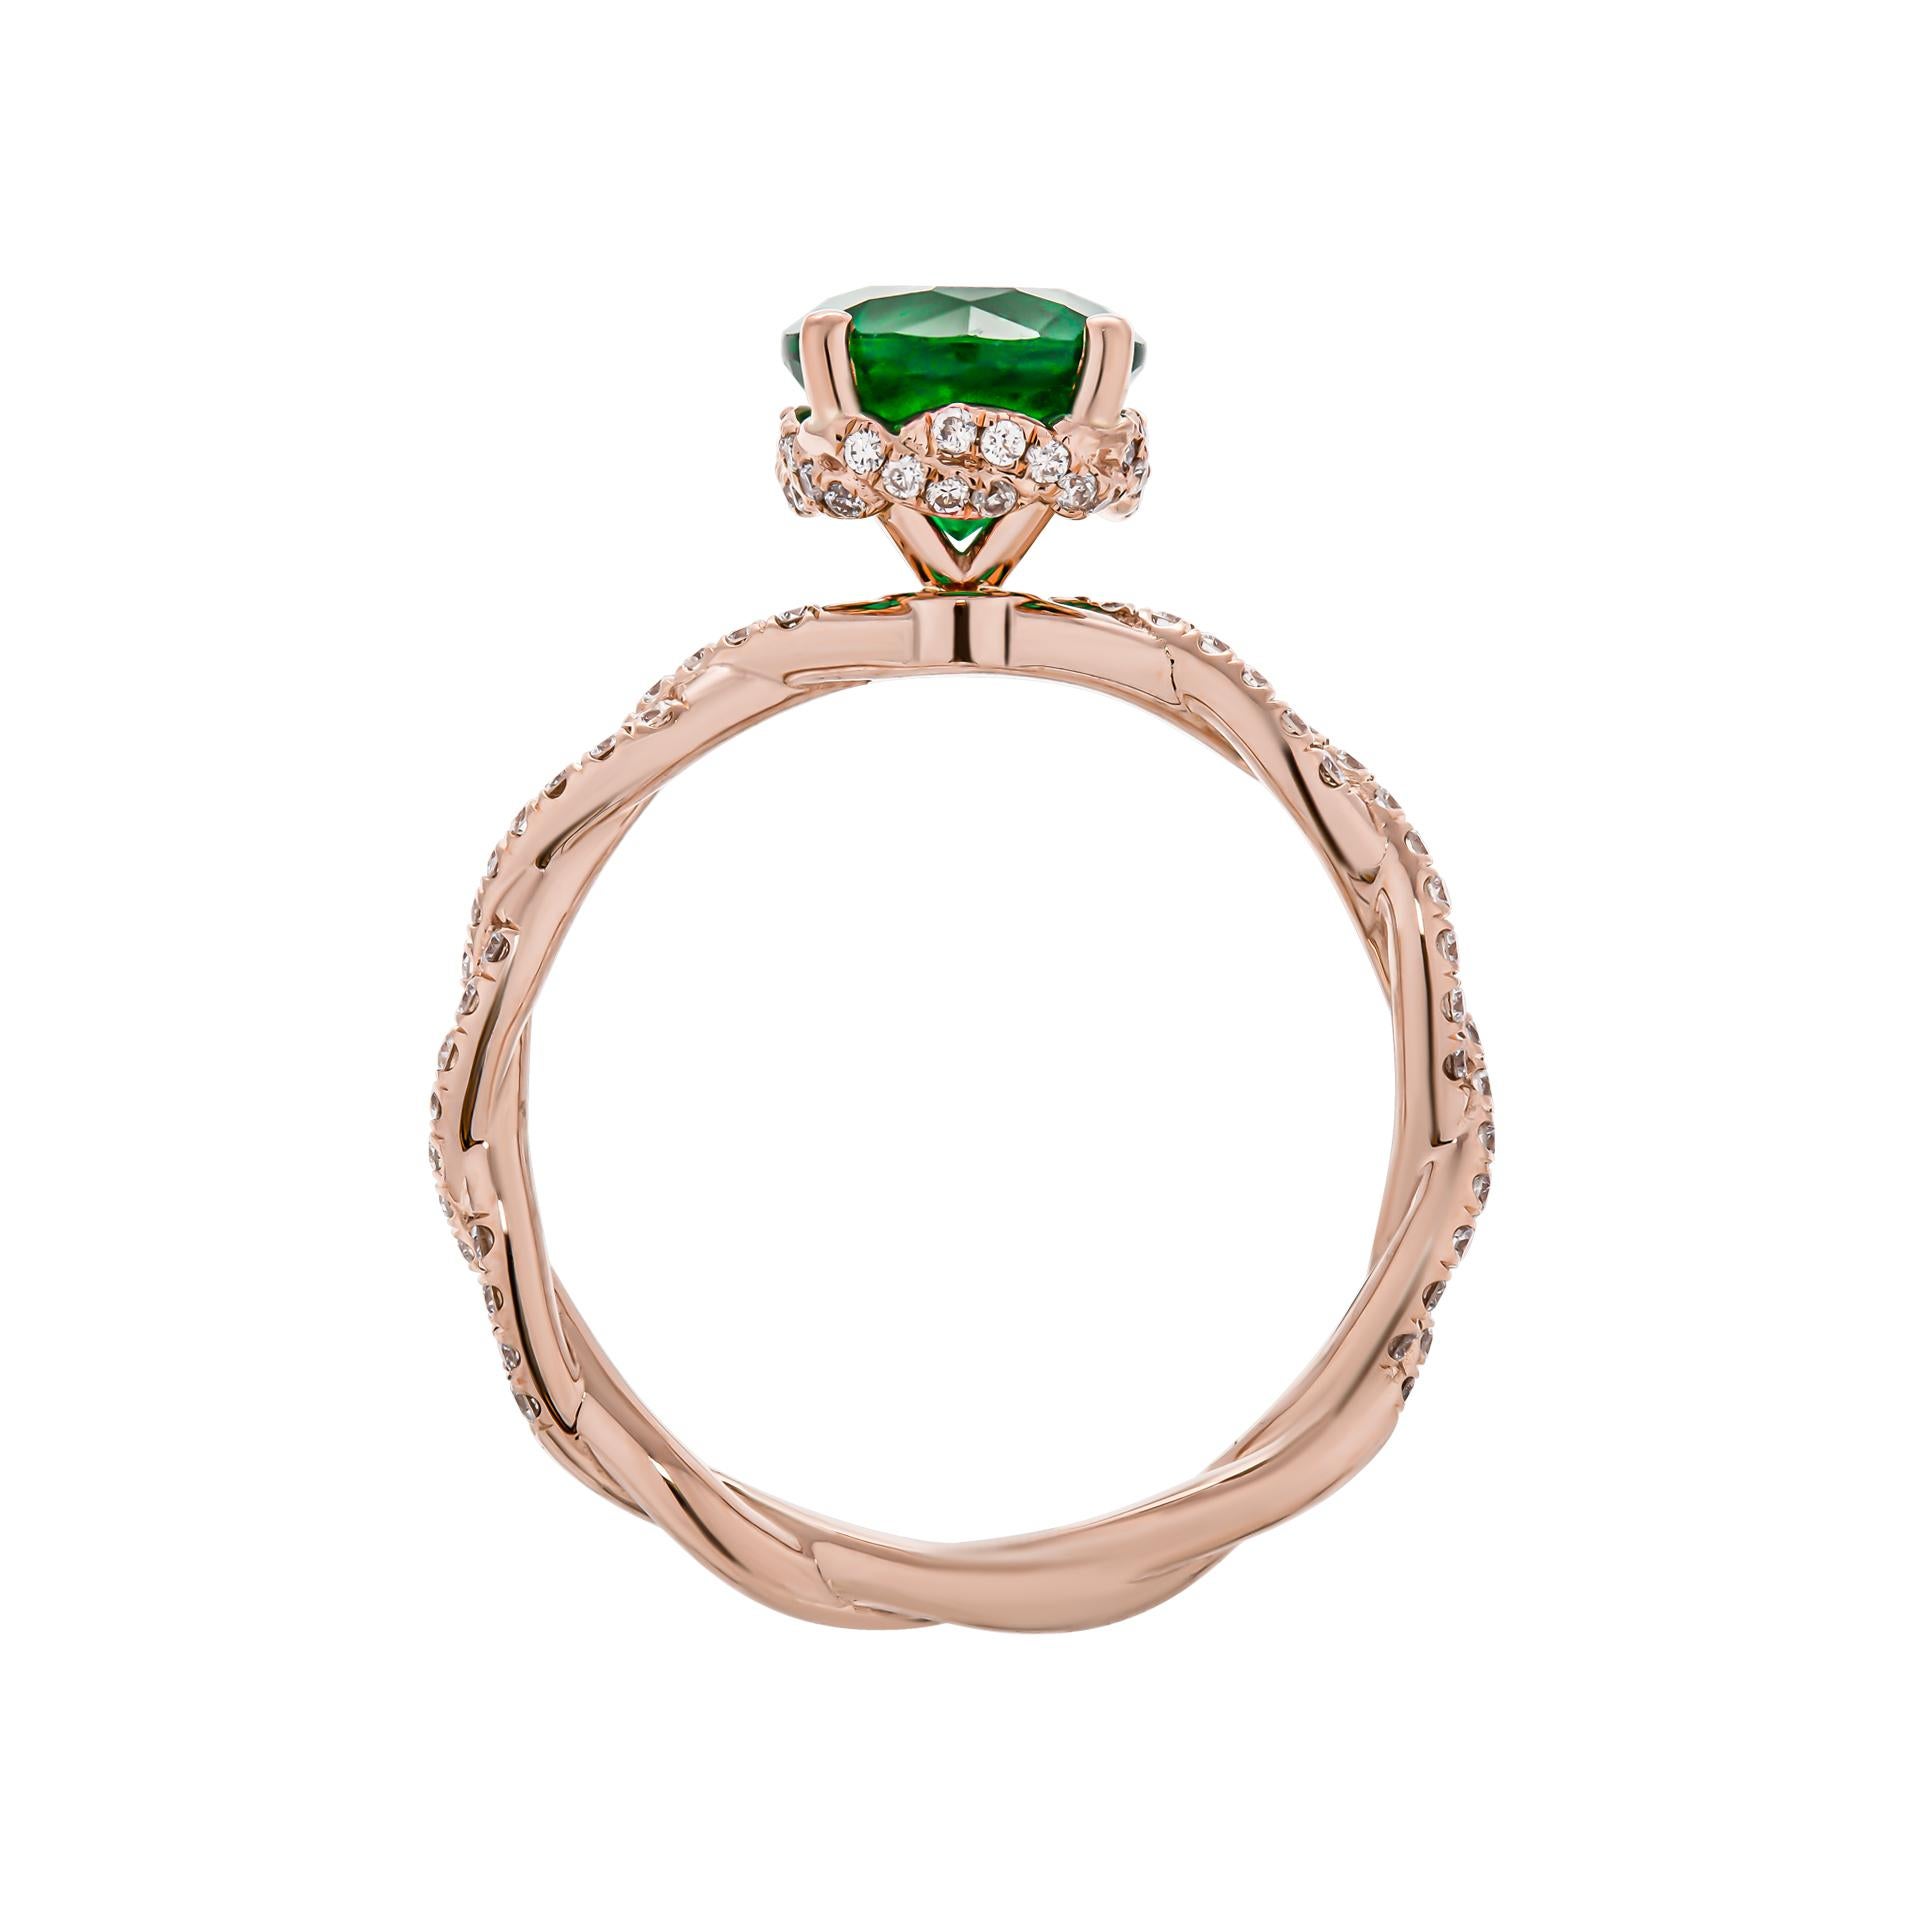 Cocktail Ring with 1.32ct Round Green Emerald in 14K Rose Gold Diamond
Twist shank & diamond twist wrap totaling 1.20ct 
Size: 5.75
Appraisal available upon request 

Retail value: 15,000.00$